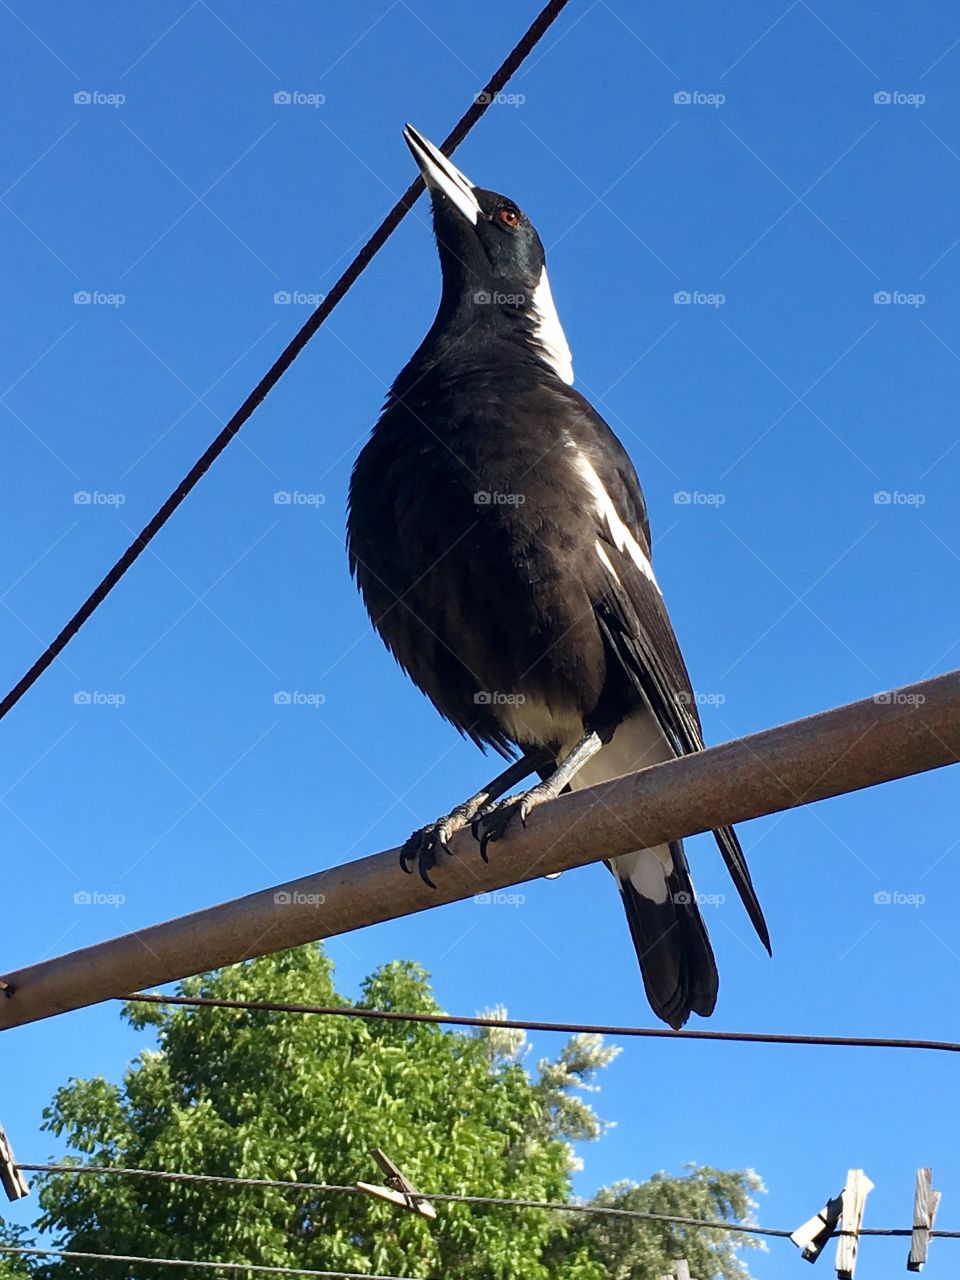 Warbling magpie on a high wire against a vivid blue sky closeup